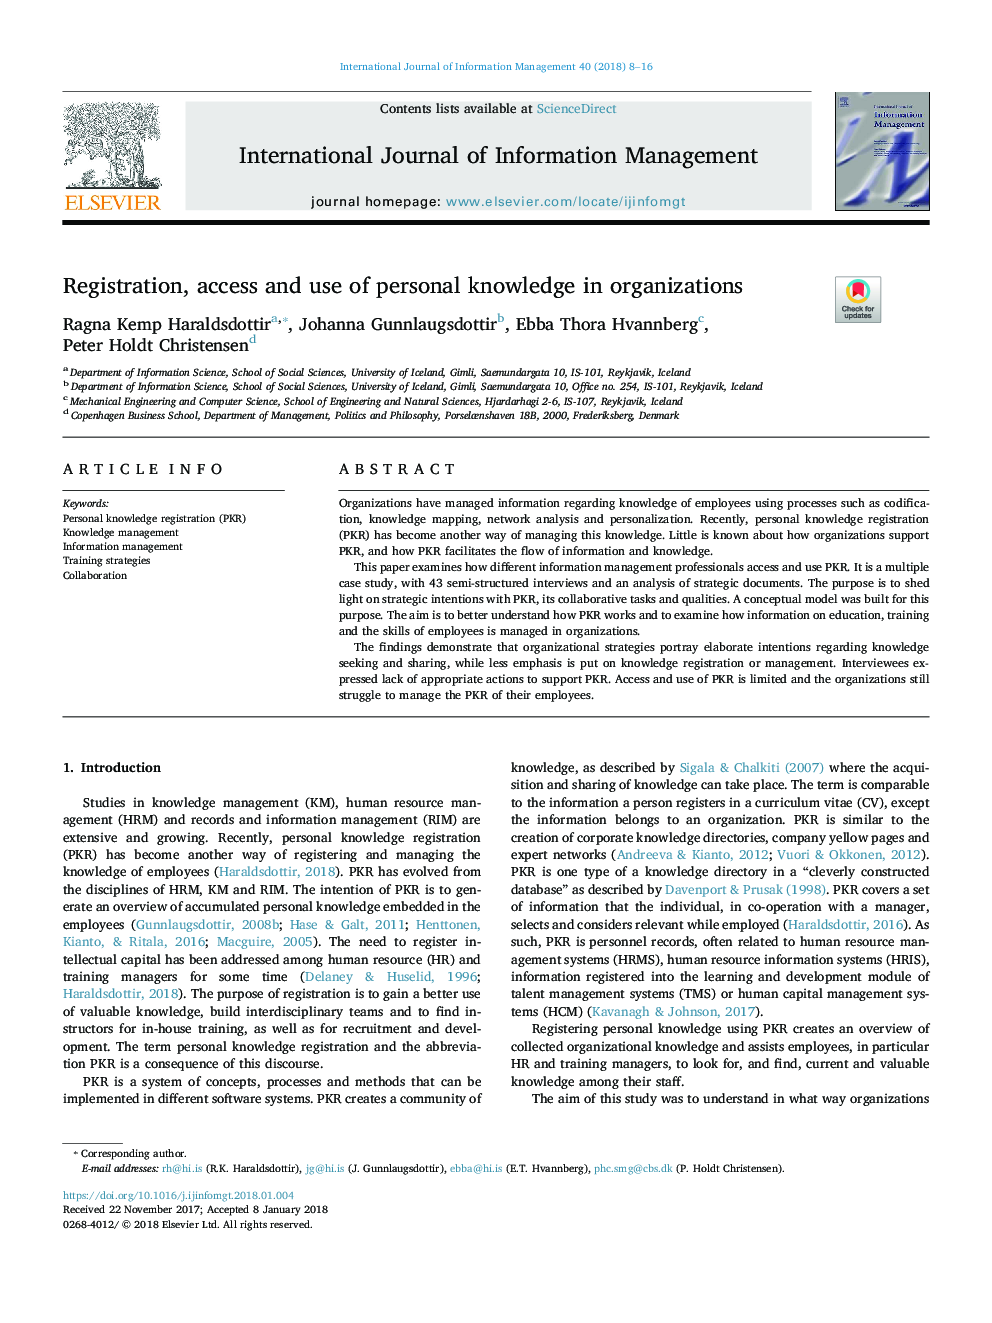 Registration, access and use of personal knowledge in organizations